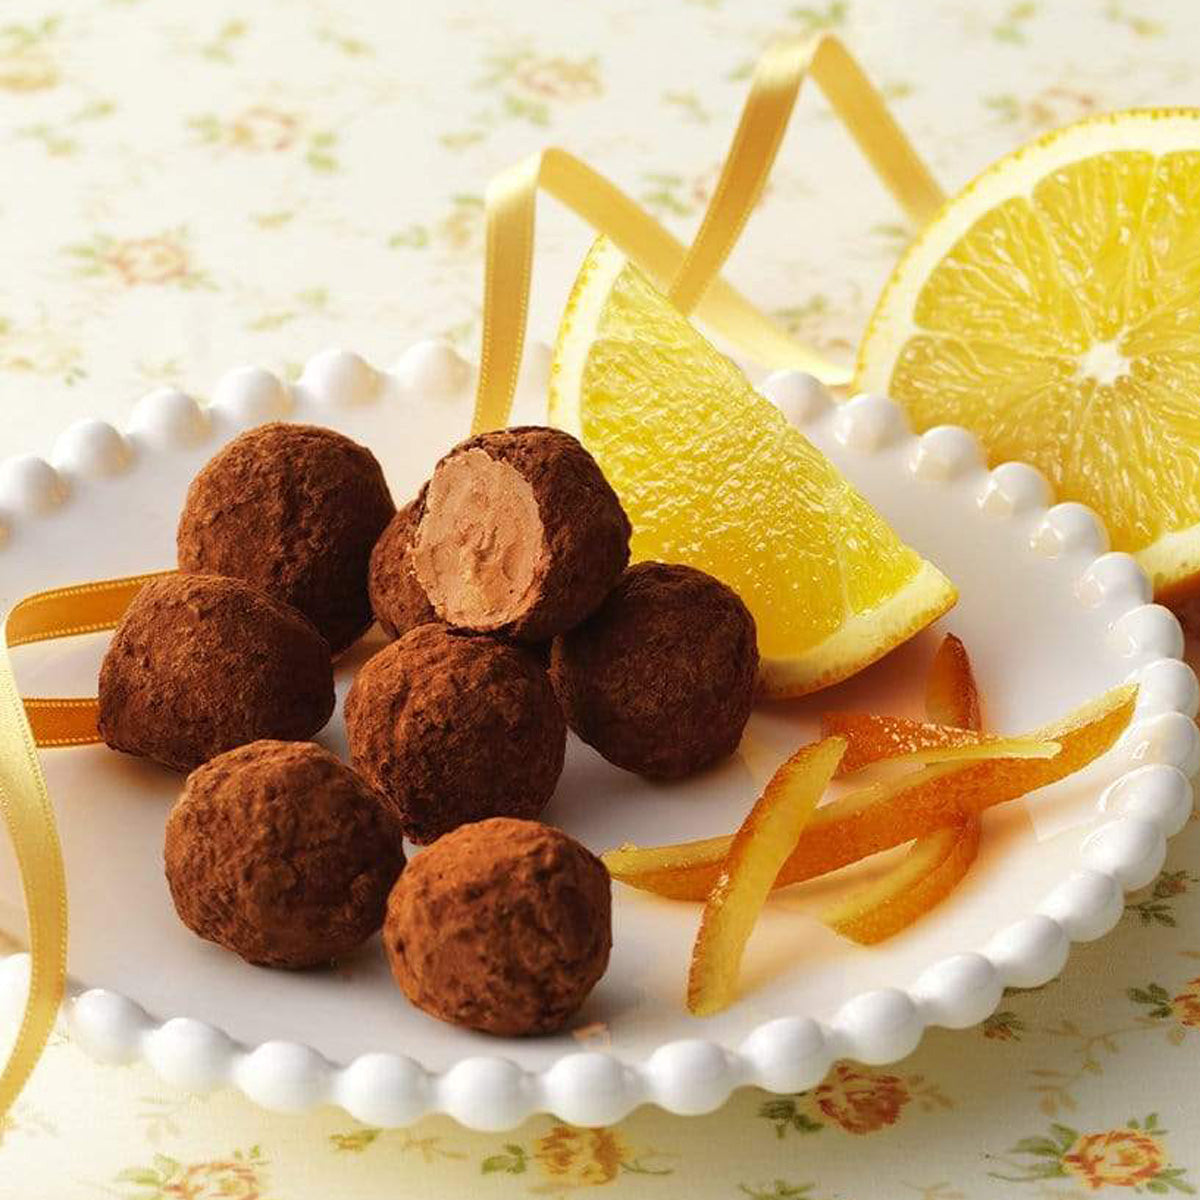 ROYCE' Chocolate - Petite Truffe "Orange" - Image shows brown chocolate balls on a white plate with orange peels and slices. Accents include a gold ribbon and a table background with yellow and green floral prints.